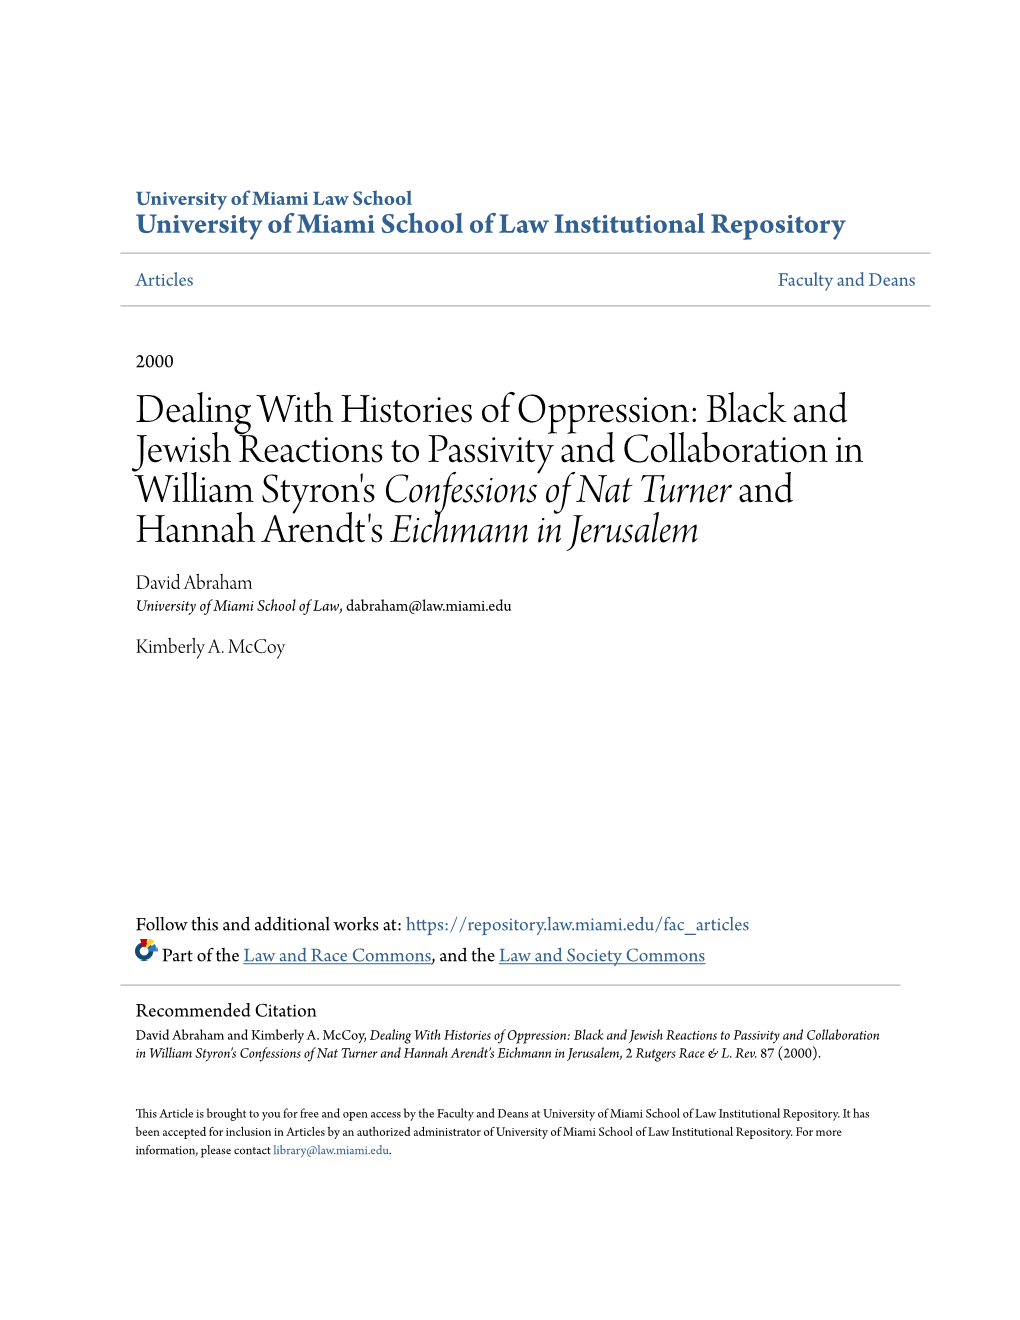 Dealing with Histories of Oppression: Black and Jewish Reactions To